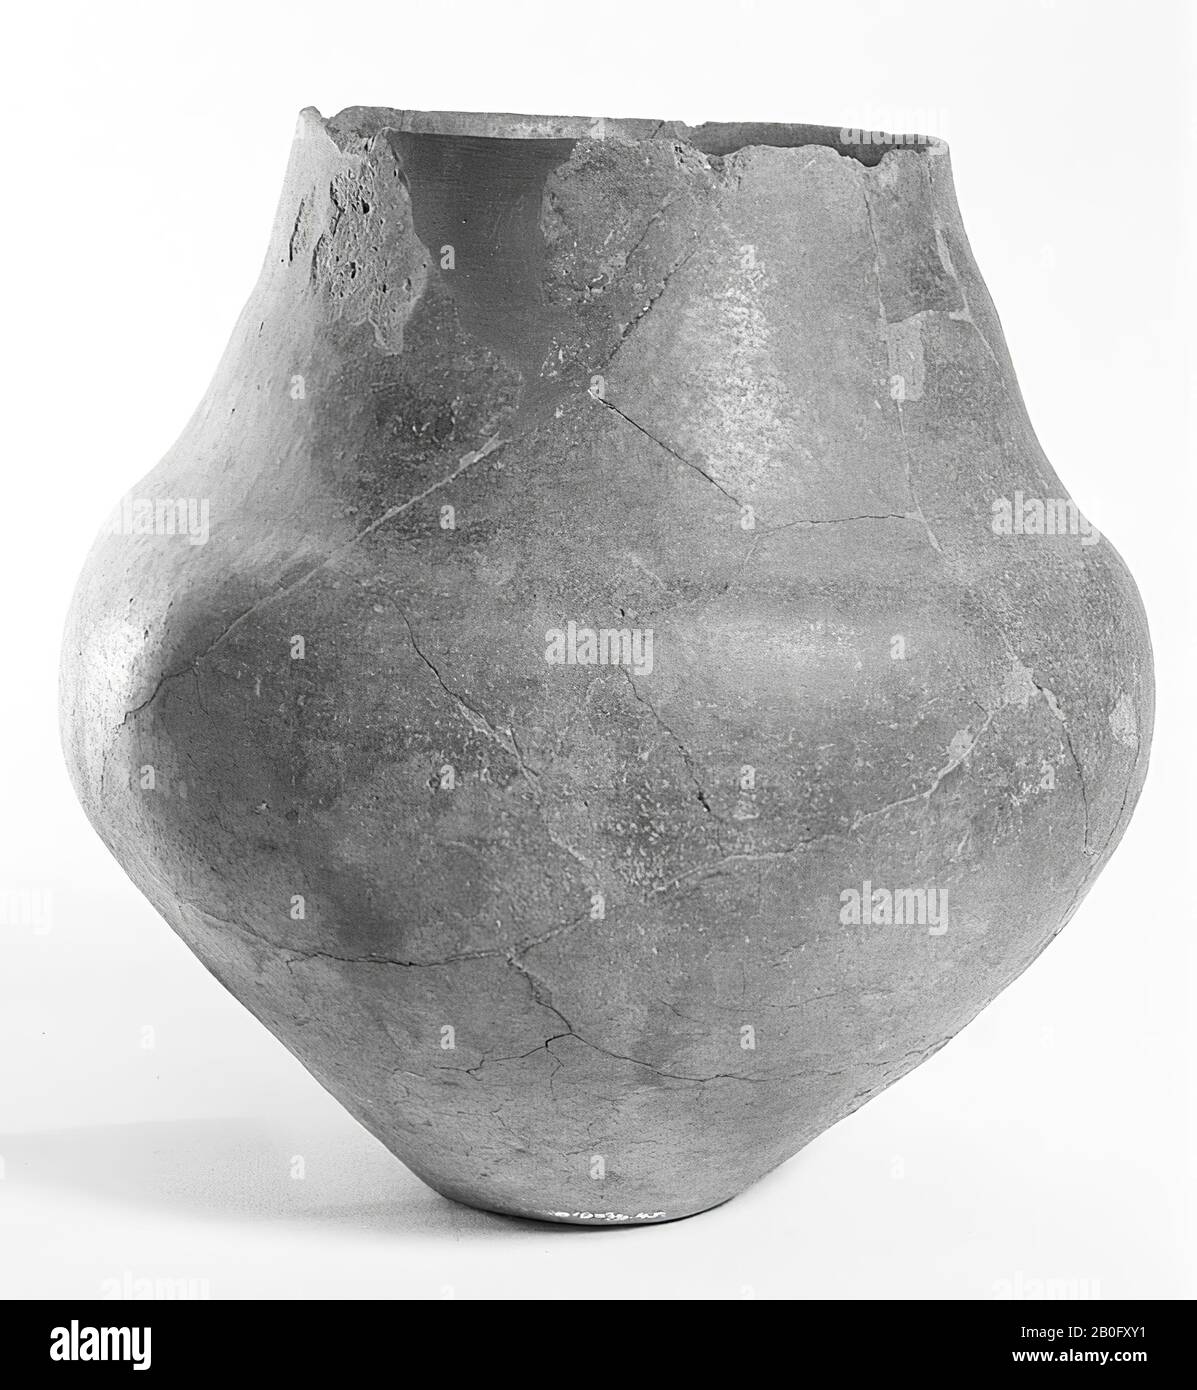 Proto-Saxon urn of earthenware. Old bonding and additions, the edge is damaged, surface damage. Contains cremated residues, urn, earthenware, h: 22.2 cm, diam: 22 cm, prehistory -1200 Stock Photo